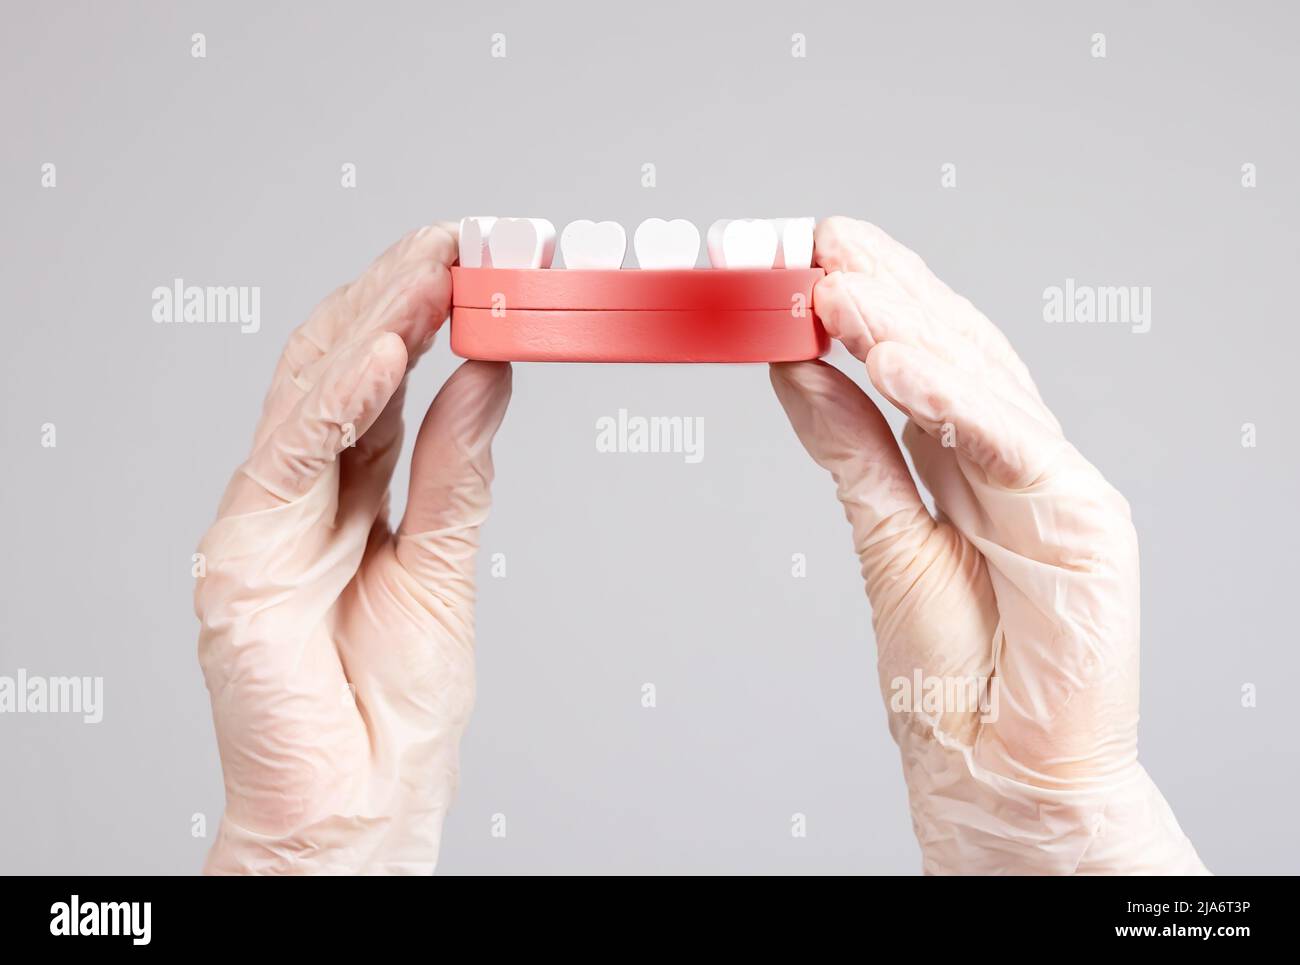 Hands in gloves holding jaw model with red spot. Gums inflammation, periodontal diseases treatment. Dentistry, oral hygiene concept. High quality photo Stock Photo